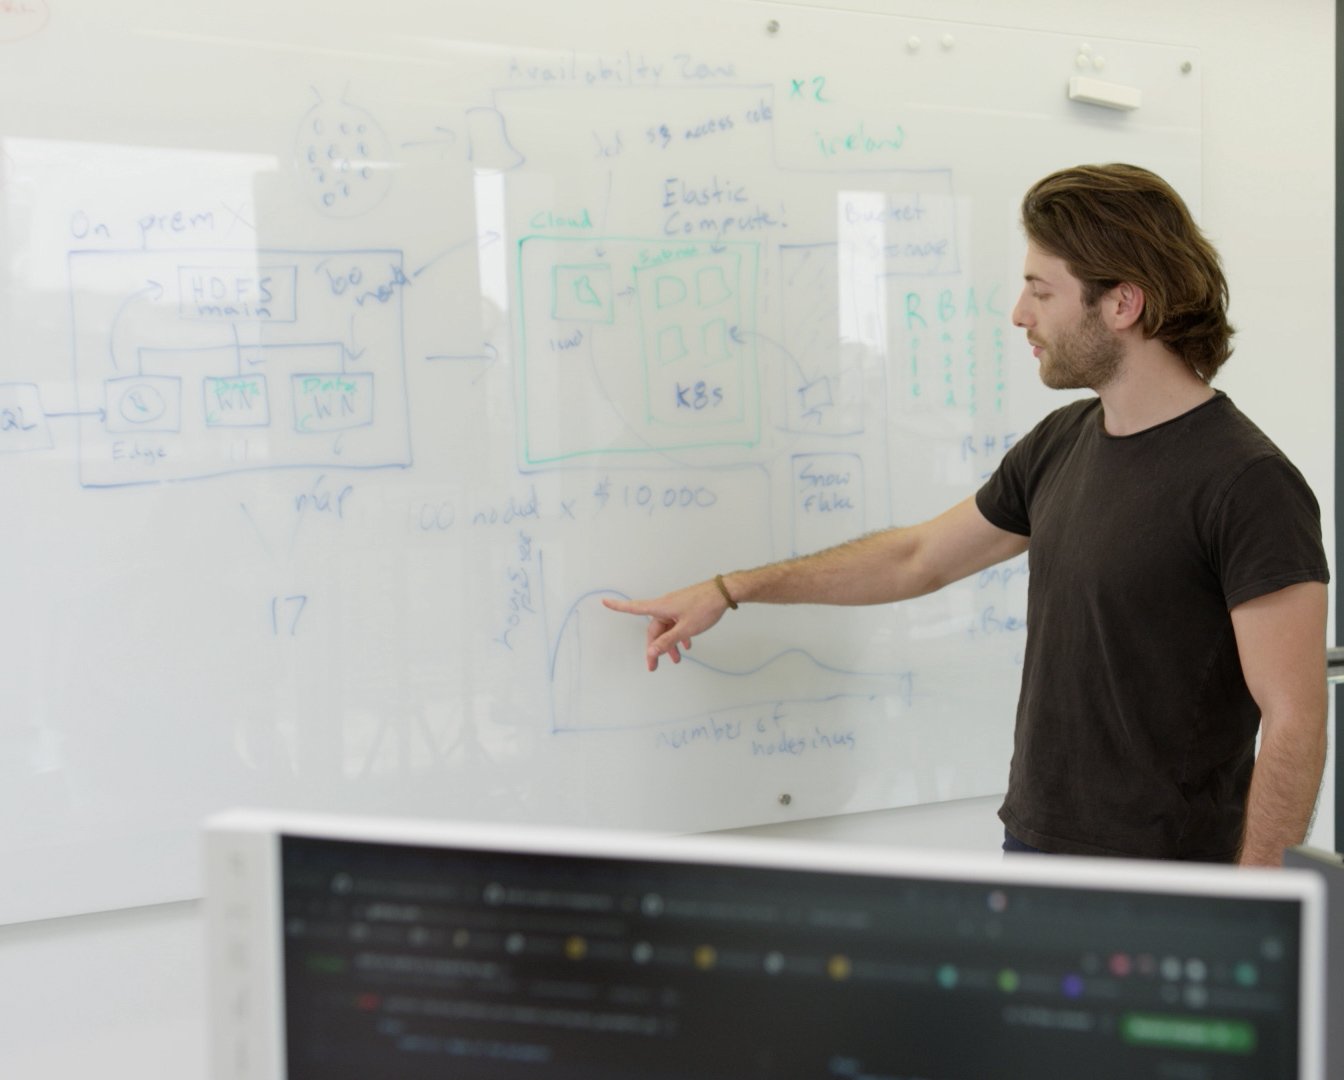 IT professional pointing to a data architecture diagram on a whiteboard